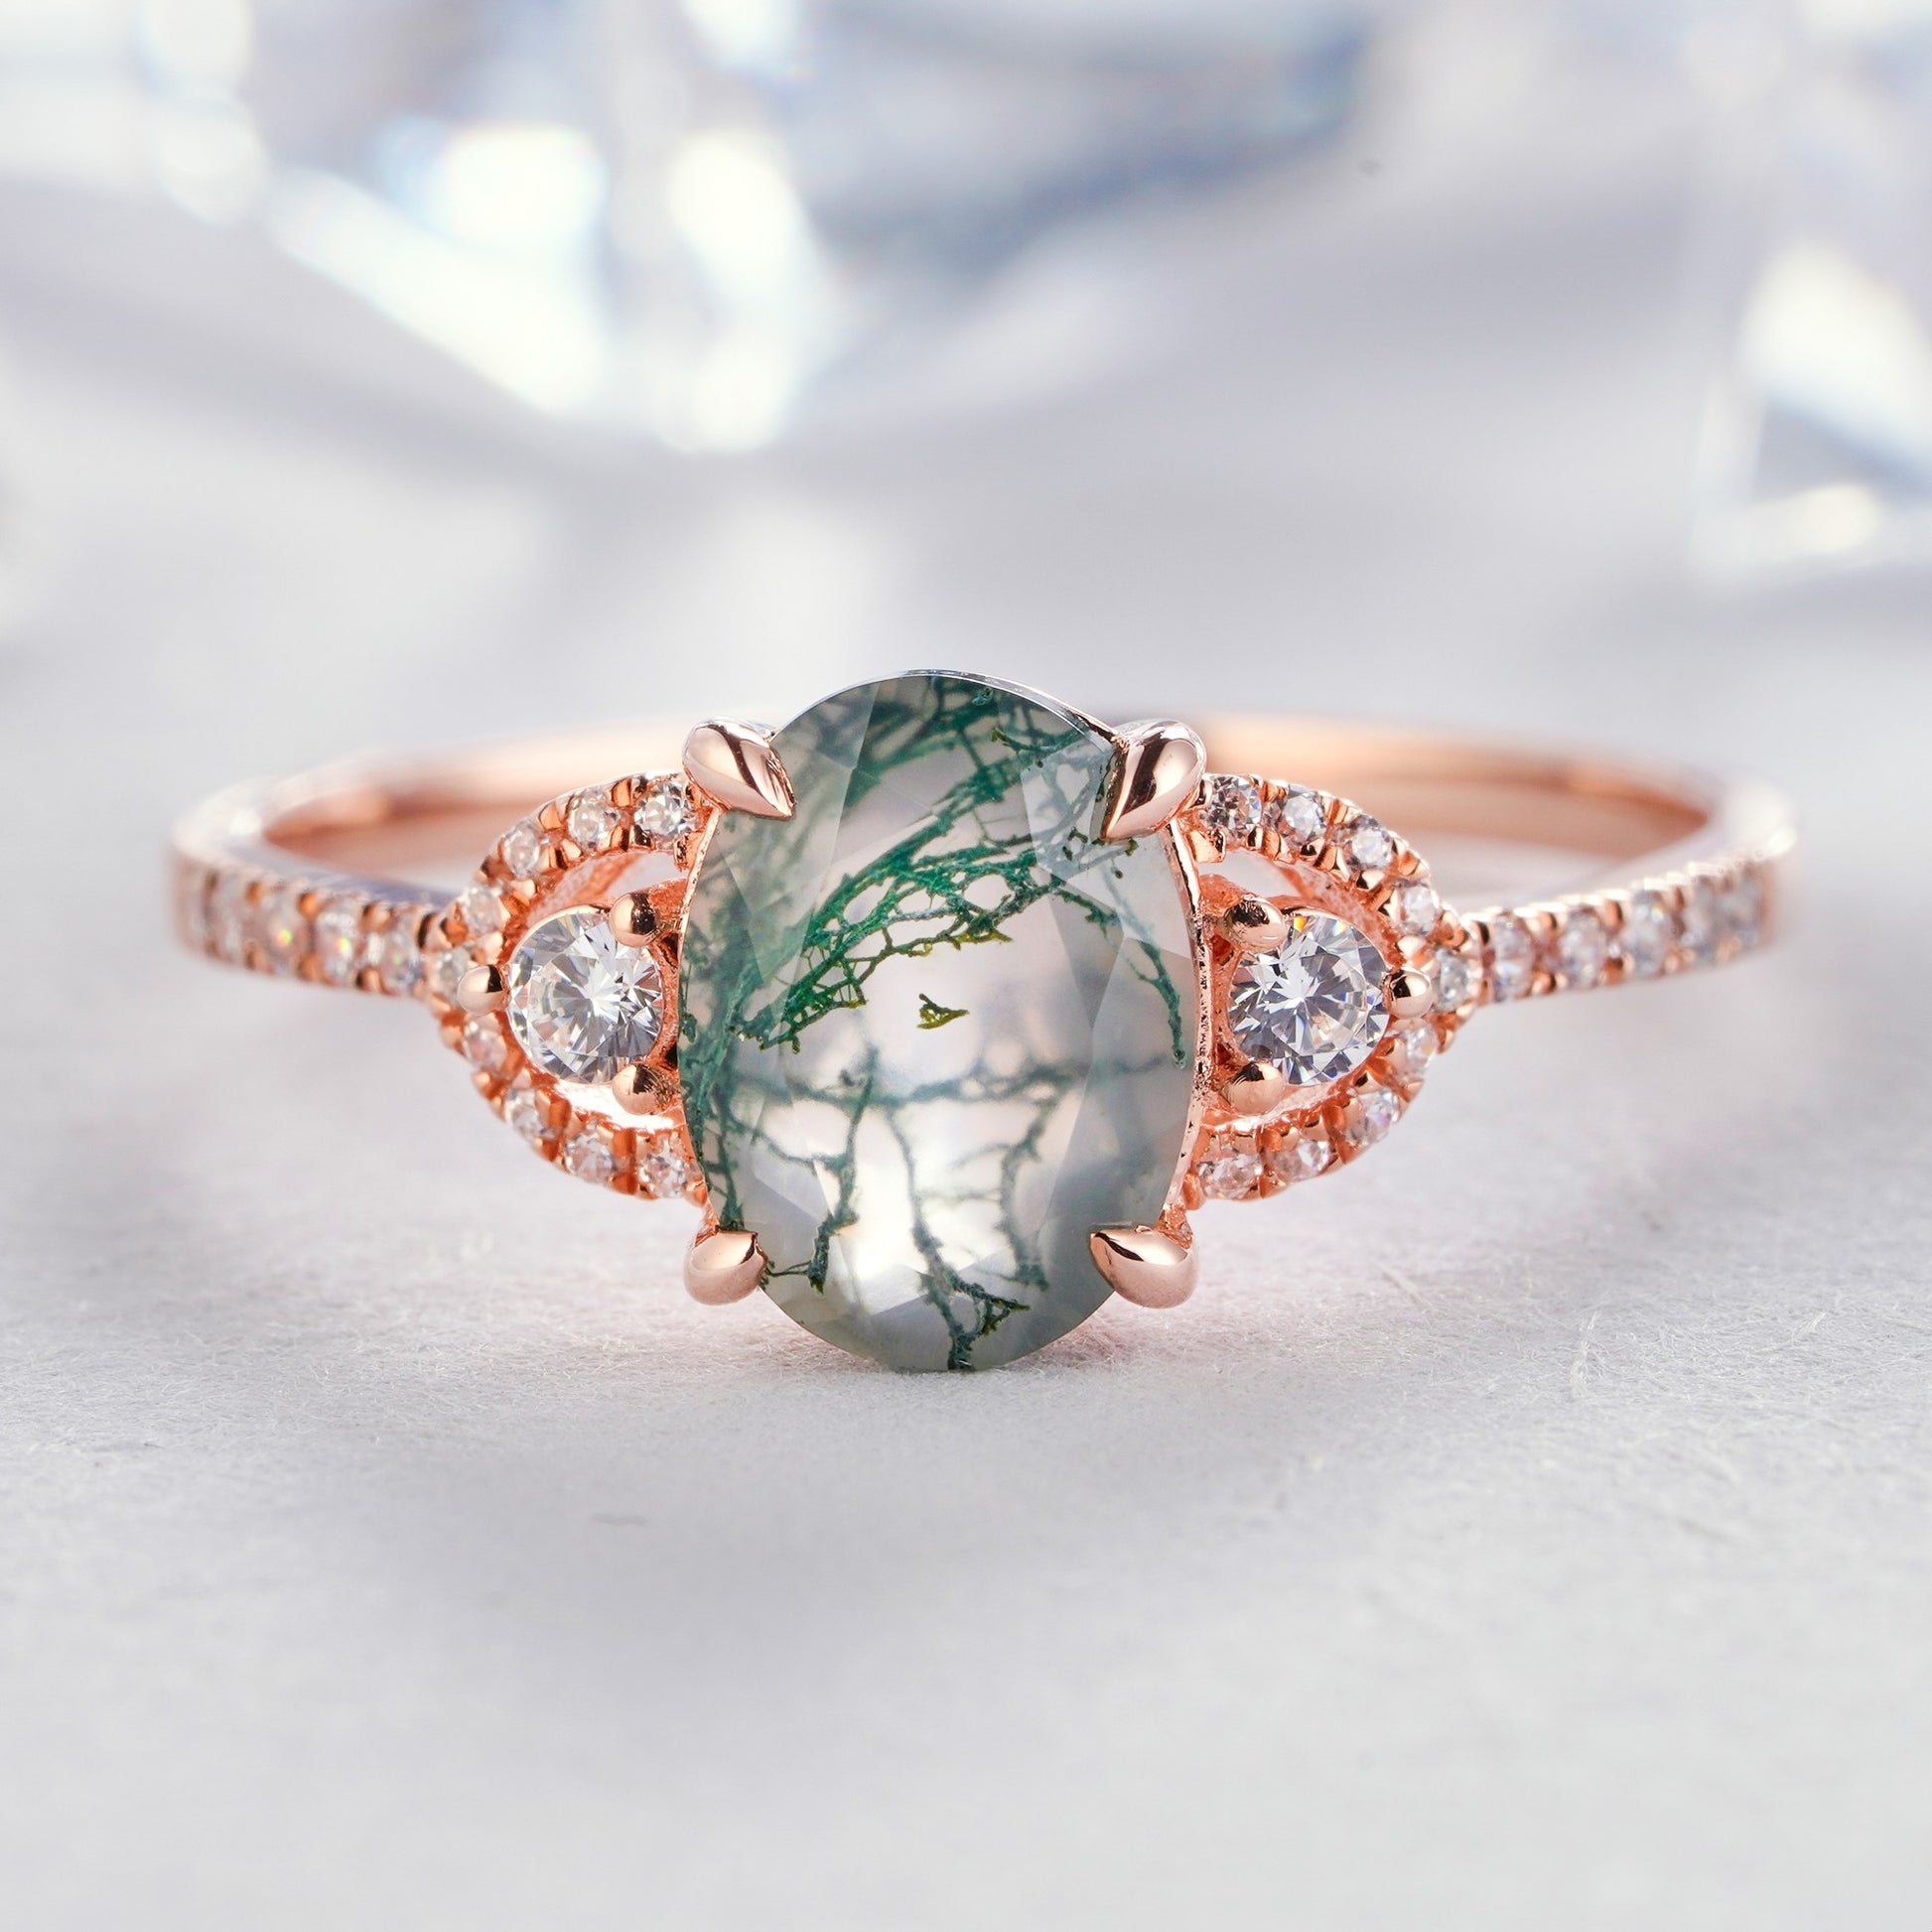 Oval cut Moss agate Engagement Ring Solid14K/18K Gold Diamond Ring - ShainJewelry